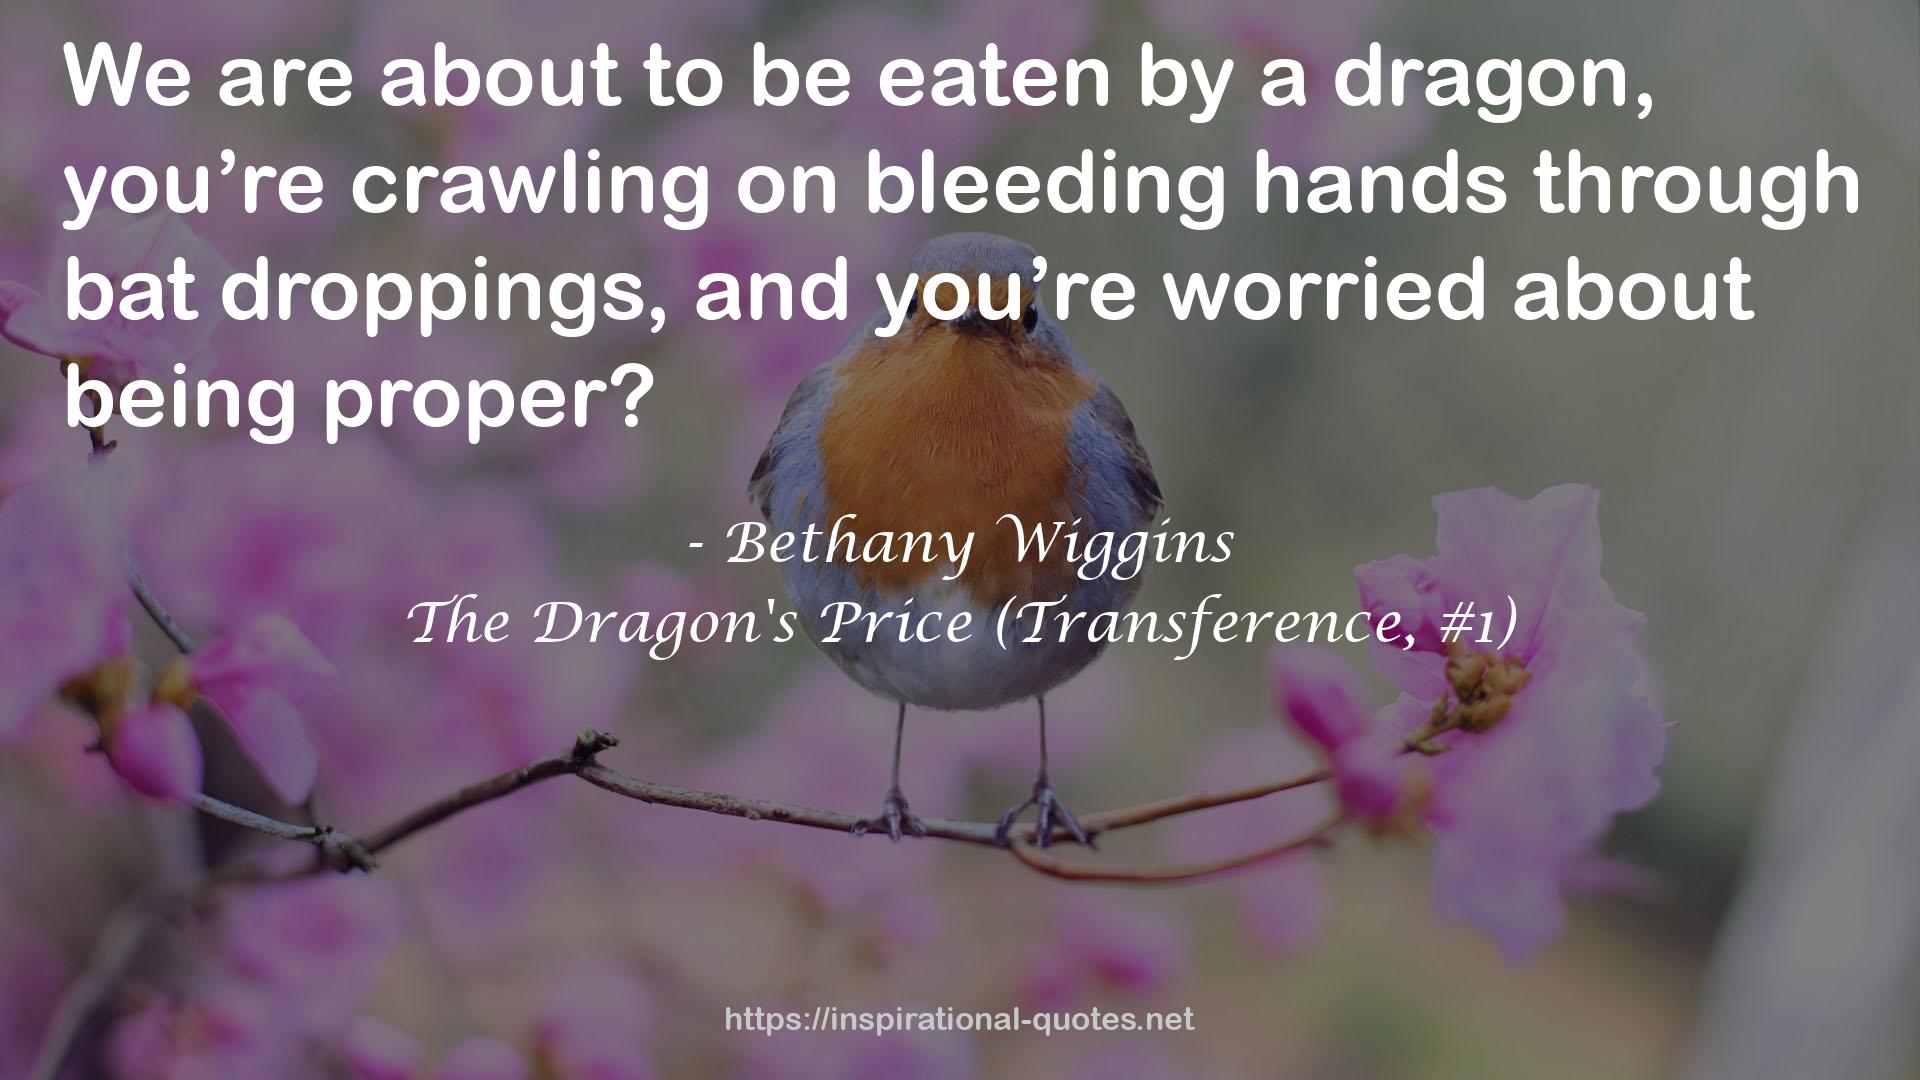 The Dragon's Price (Transference, #1) QUOTES